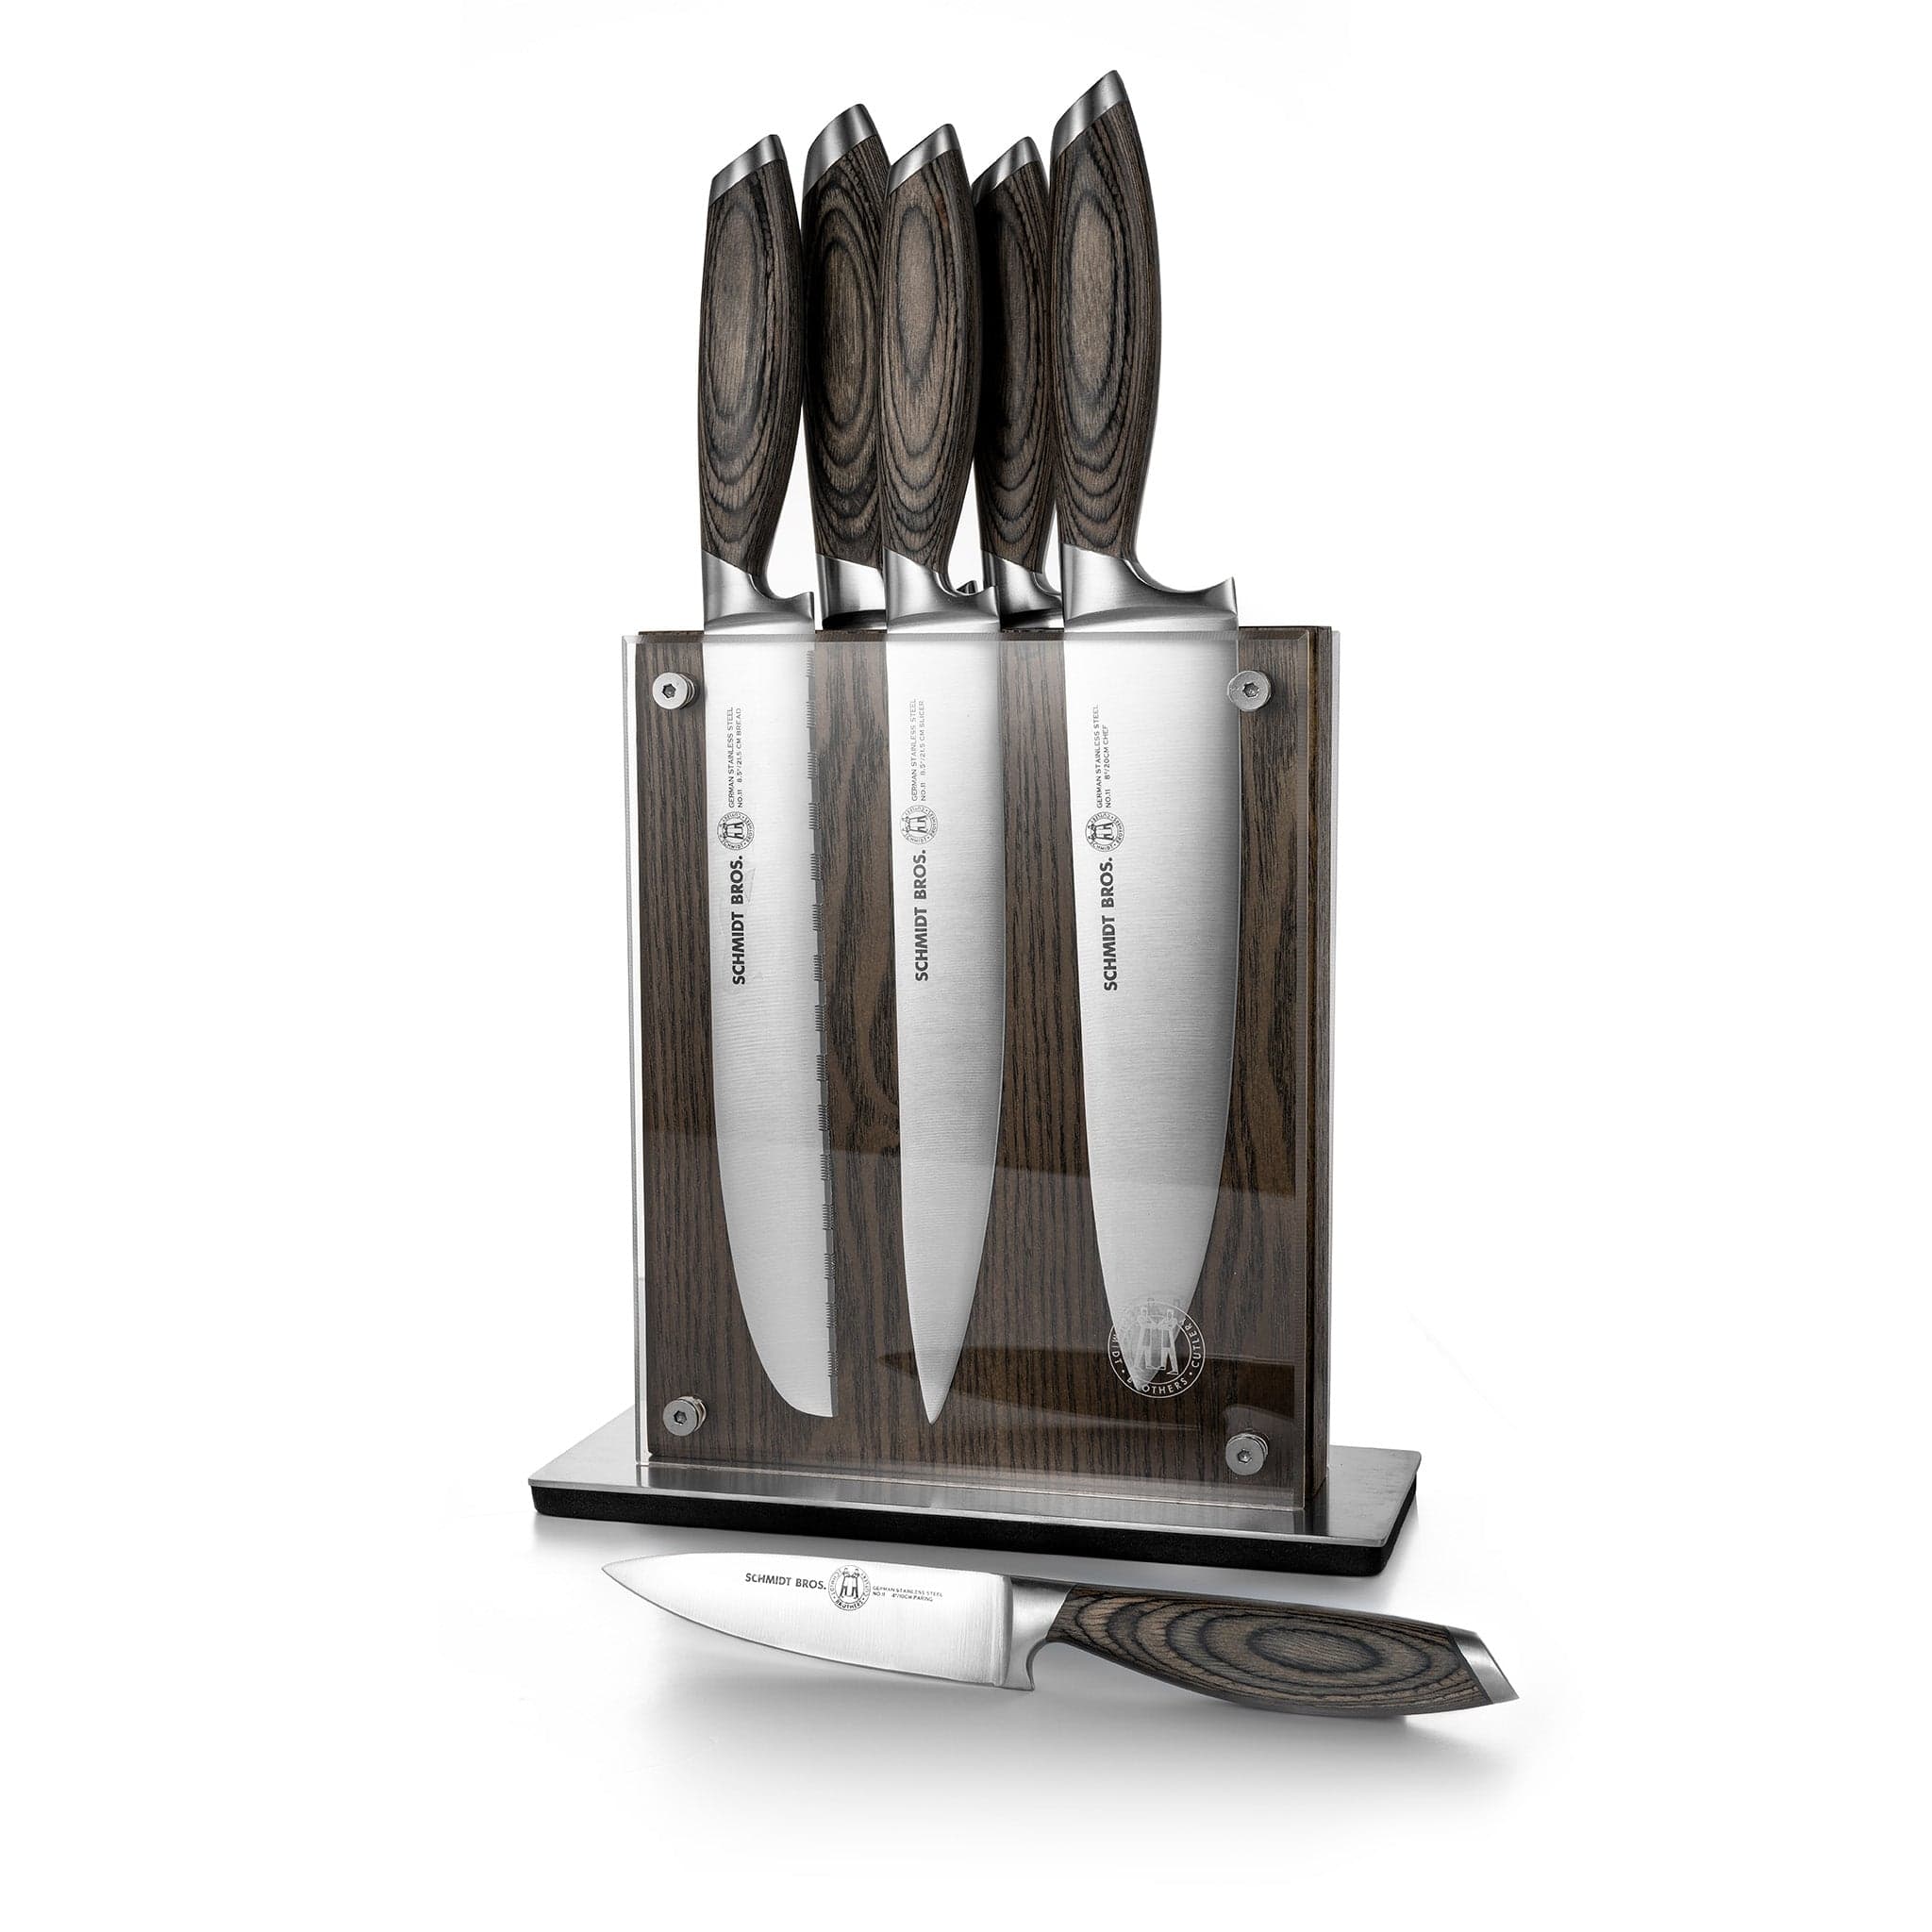  Schmidt Brothers-Cutlery Stone Series 14-Piece Kitchen Knife Set,  High-Carbon German Stainless Steel Cutlery, Two-stage Knife Sharpener and  Clear Acrylic Magnetic Knife Block: Home & Kitchen